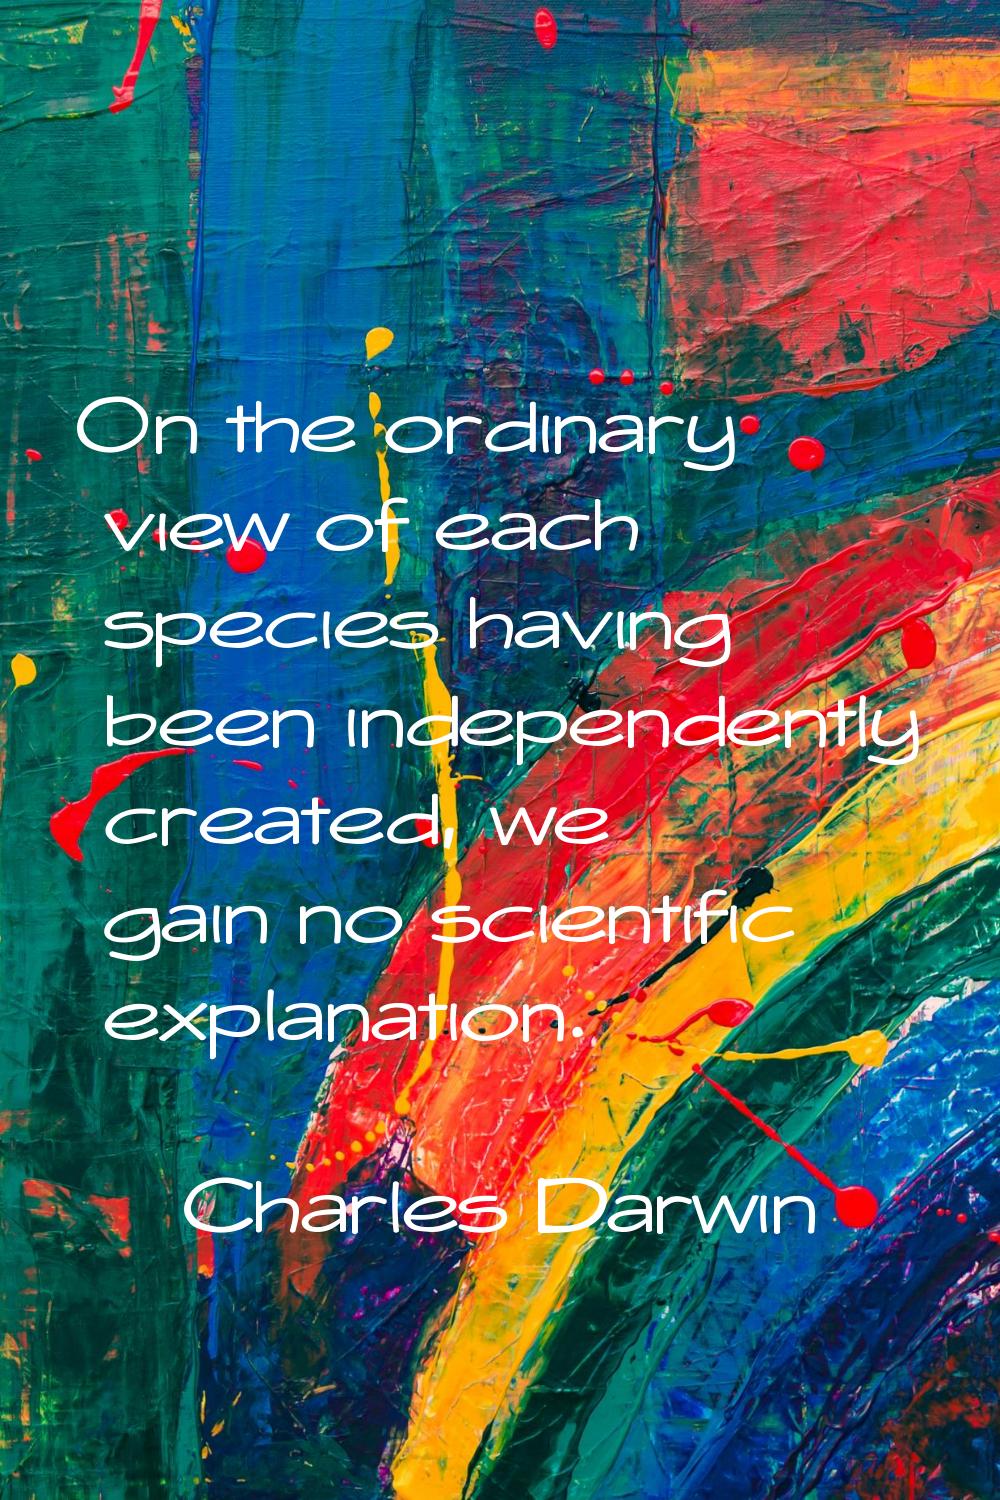 On the ordinary view of each species having been independently created, we gain no scientific expla